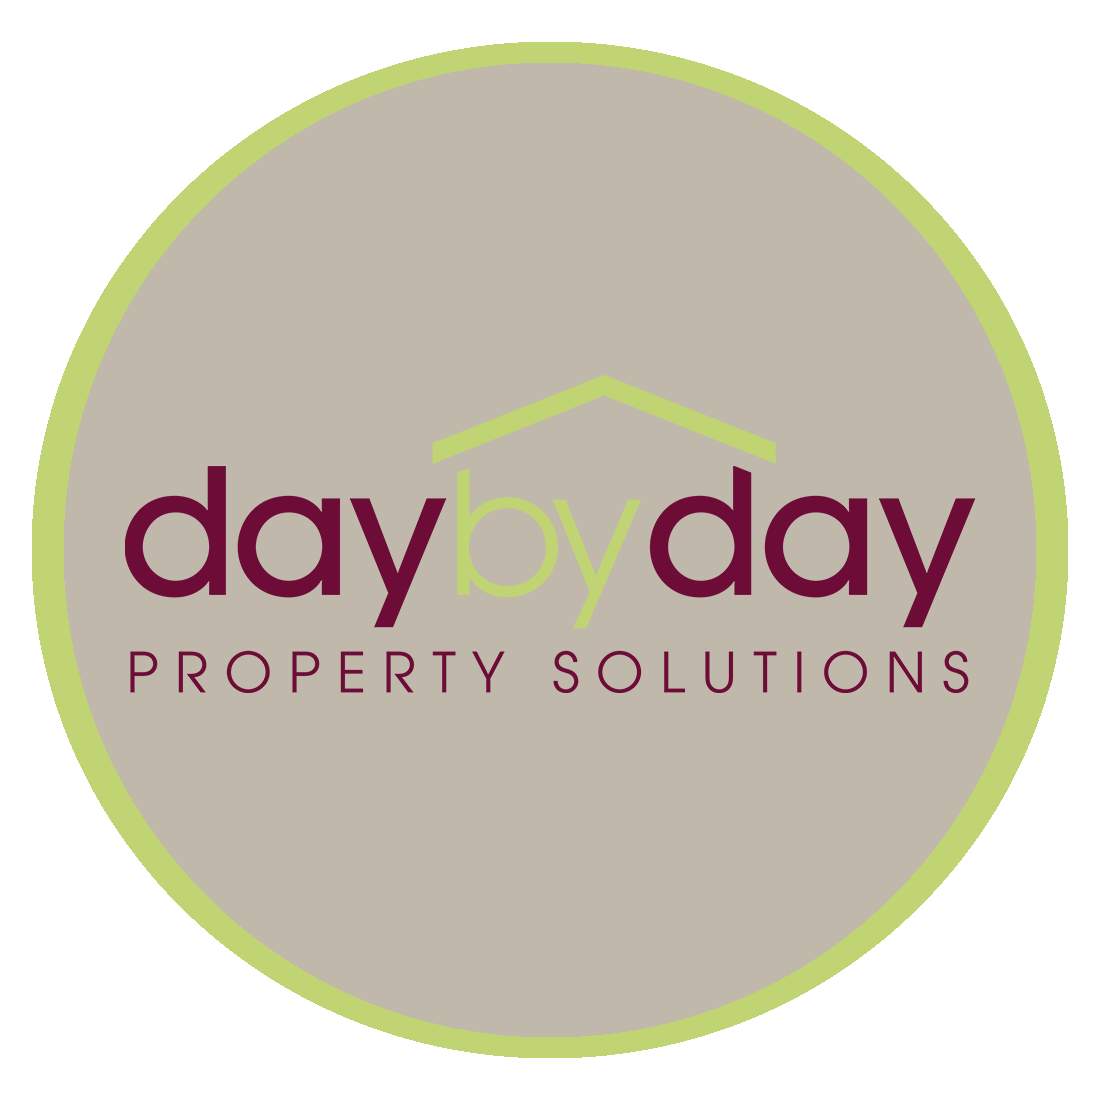 Day By Day Property Solutions